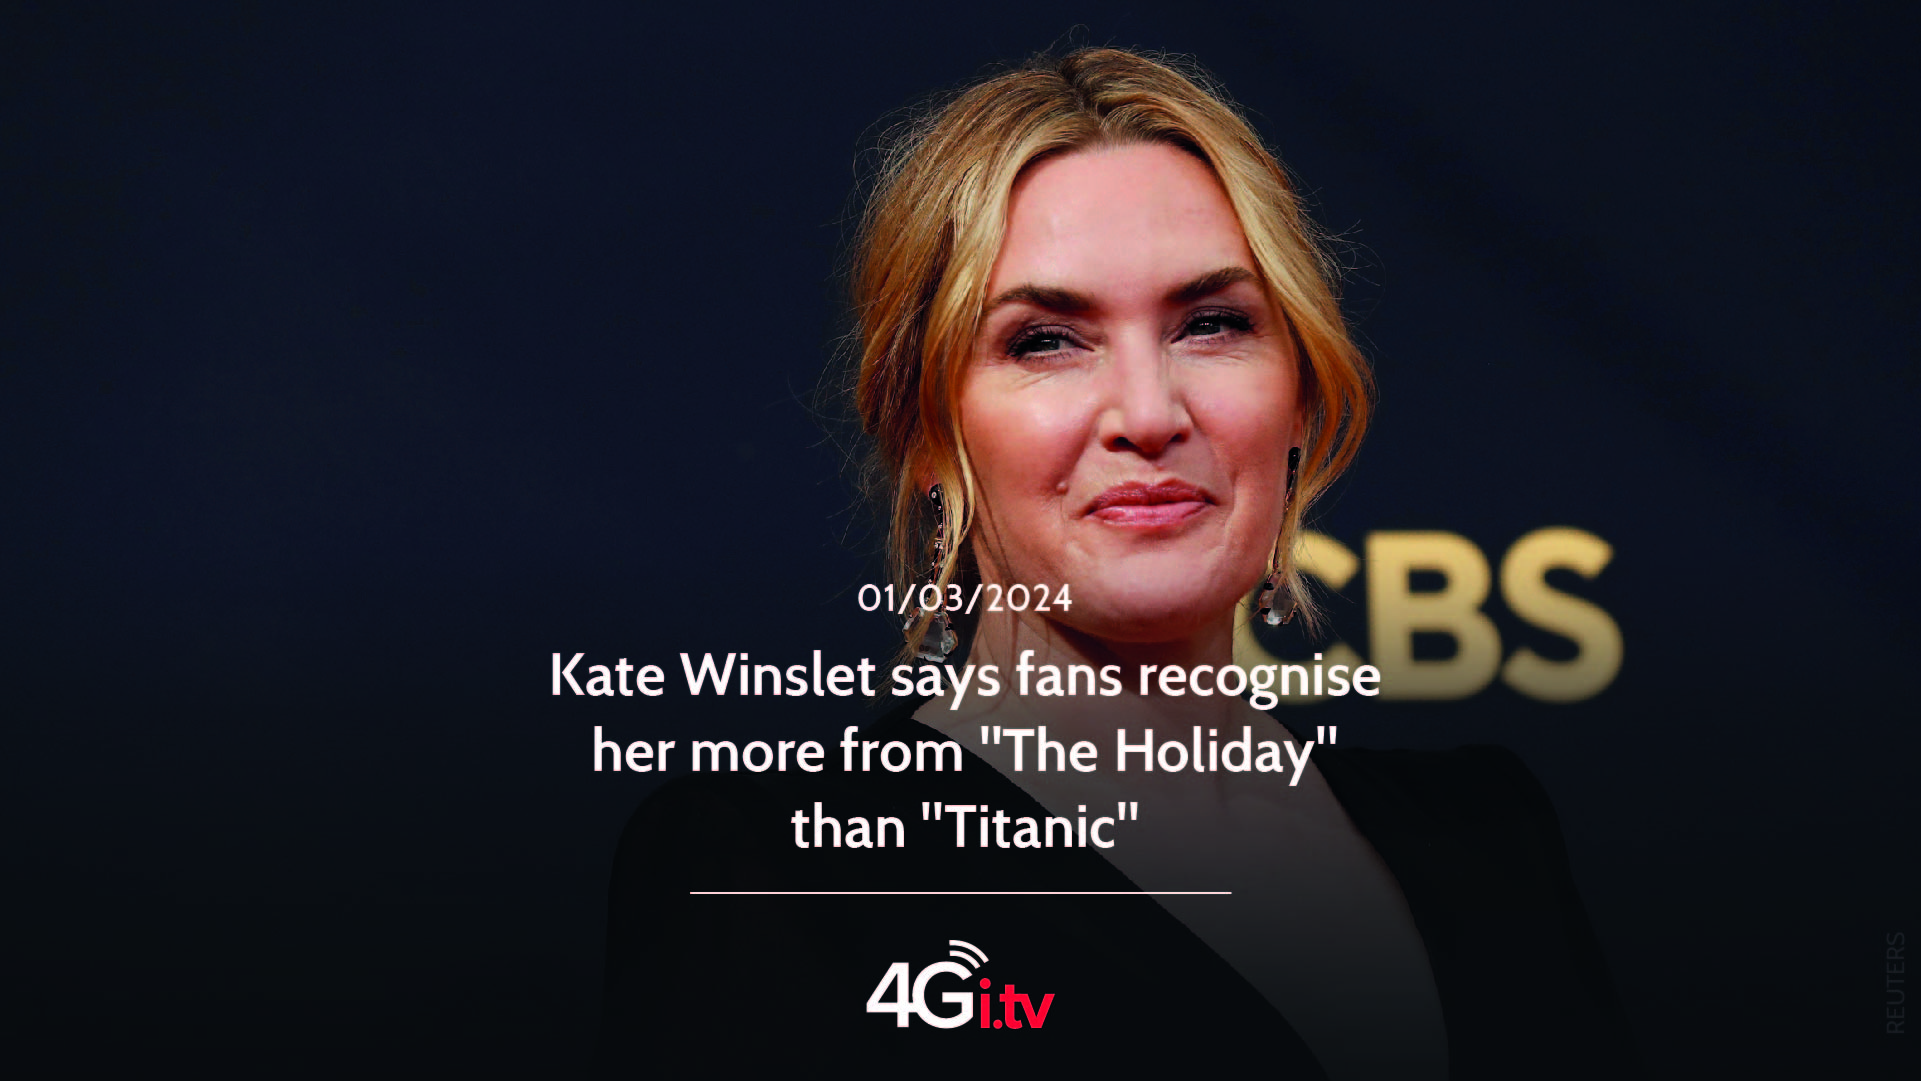 Подробнее о статье Kate Winslet says fans recognise her more from “The Holiday” than “Titanic”